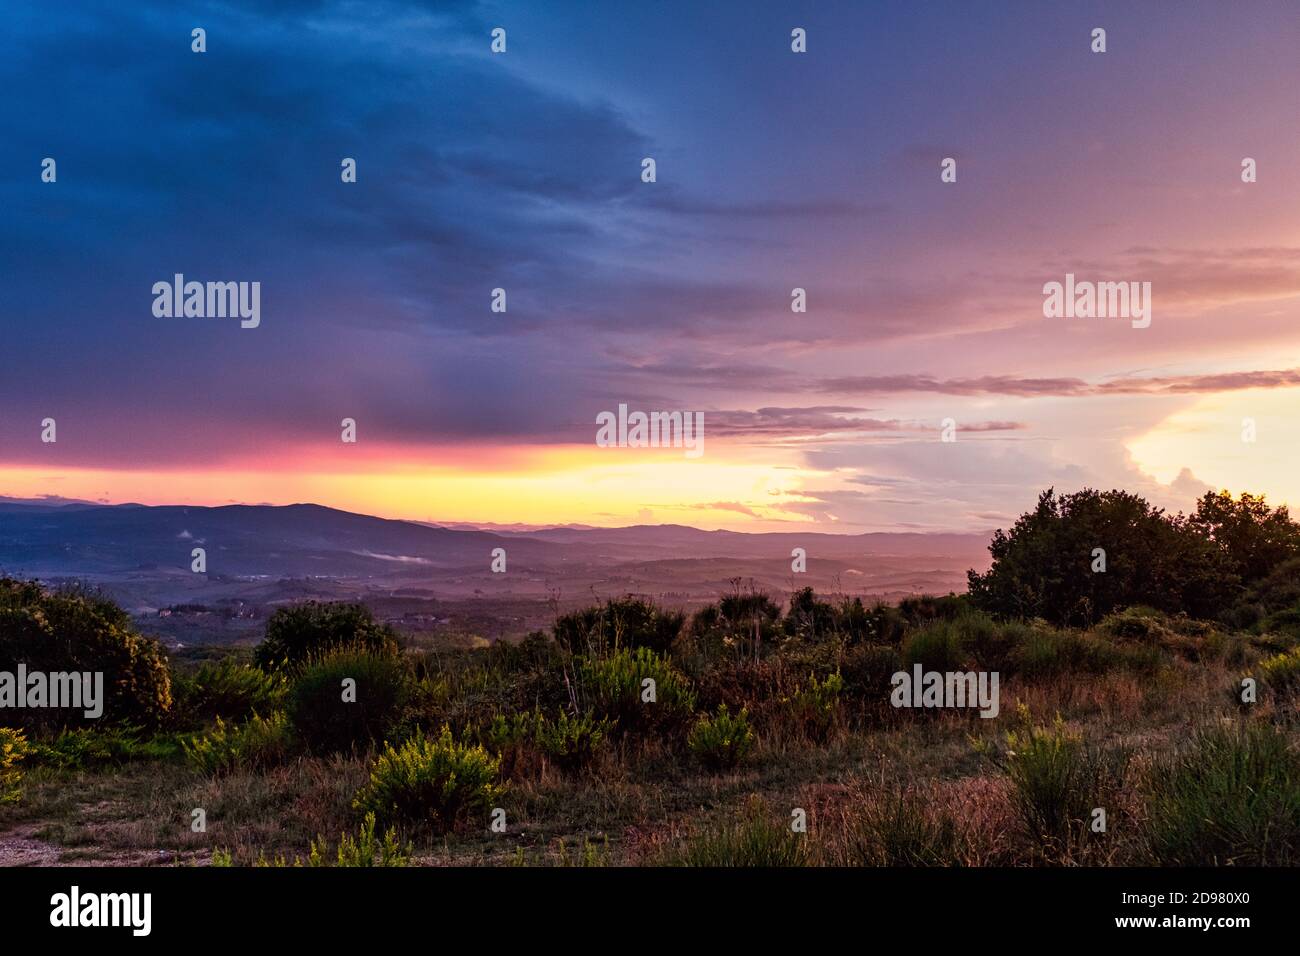 Epic twilight sky with vivid colors in rural Tuscany, Italy. Stock Photo